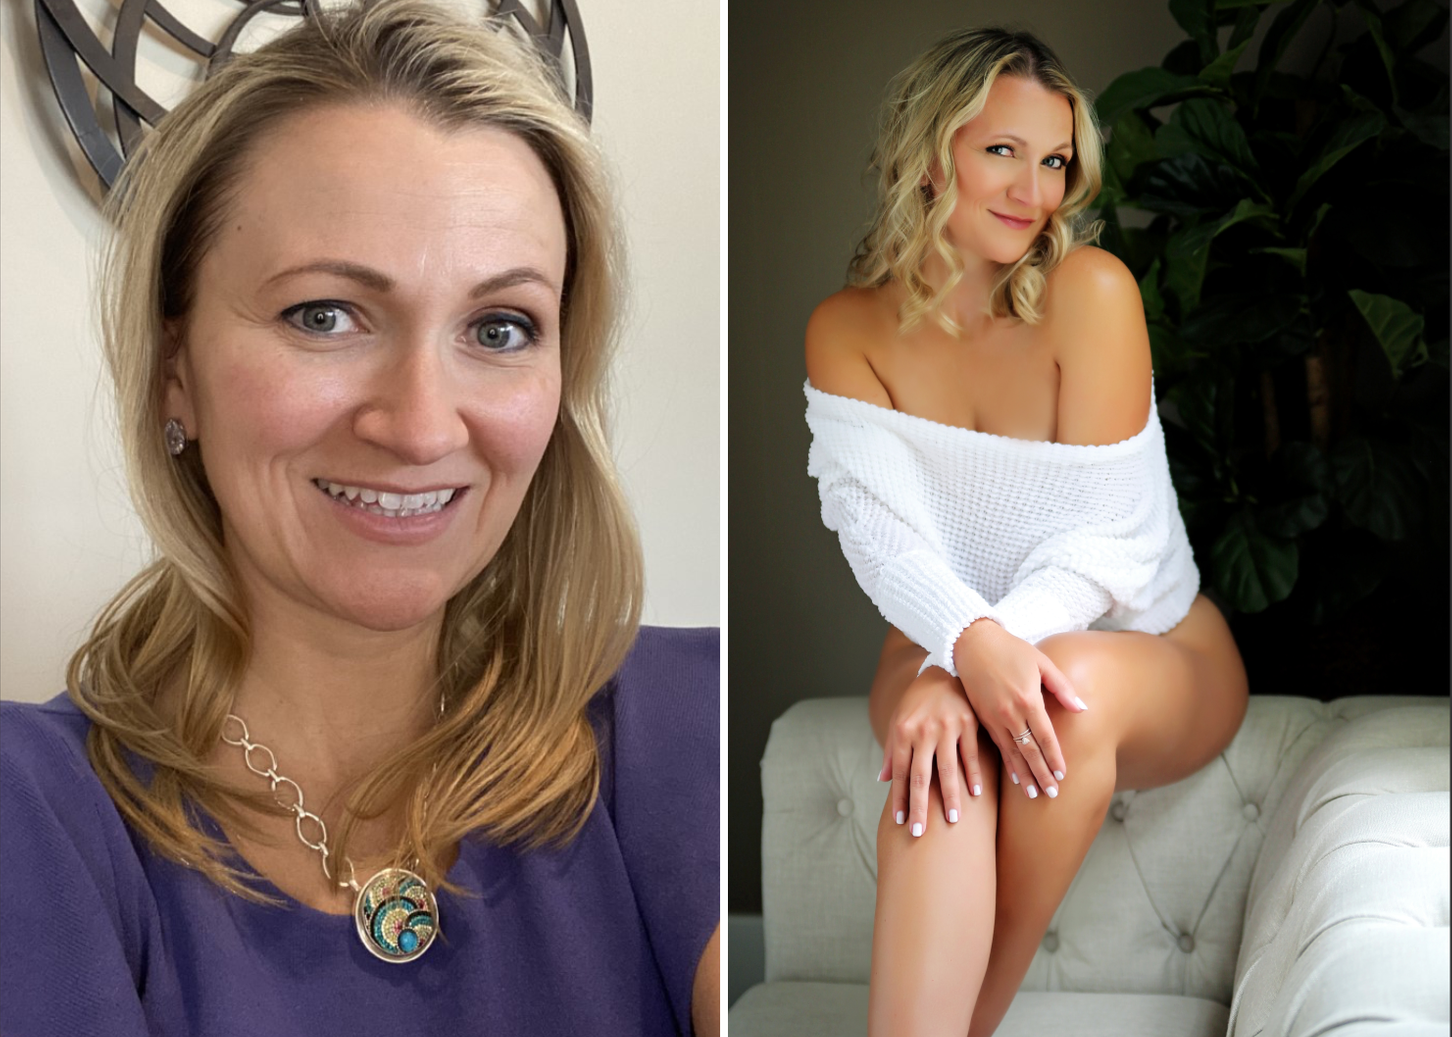 Before and after split image: on the left, a smiling woman with blonde hair, wearing a necklace, posing in front of wall decor; on the right, the same woman in a white sweater seated jaclyn cotton professional boudoir photographer springboro ohio